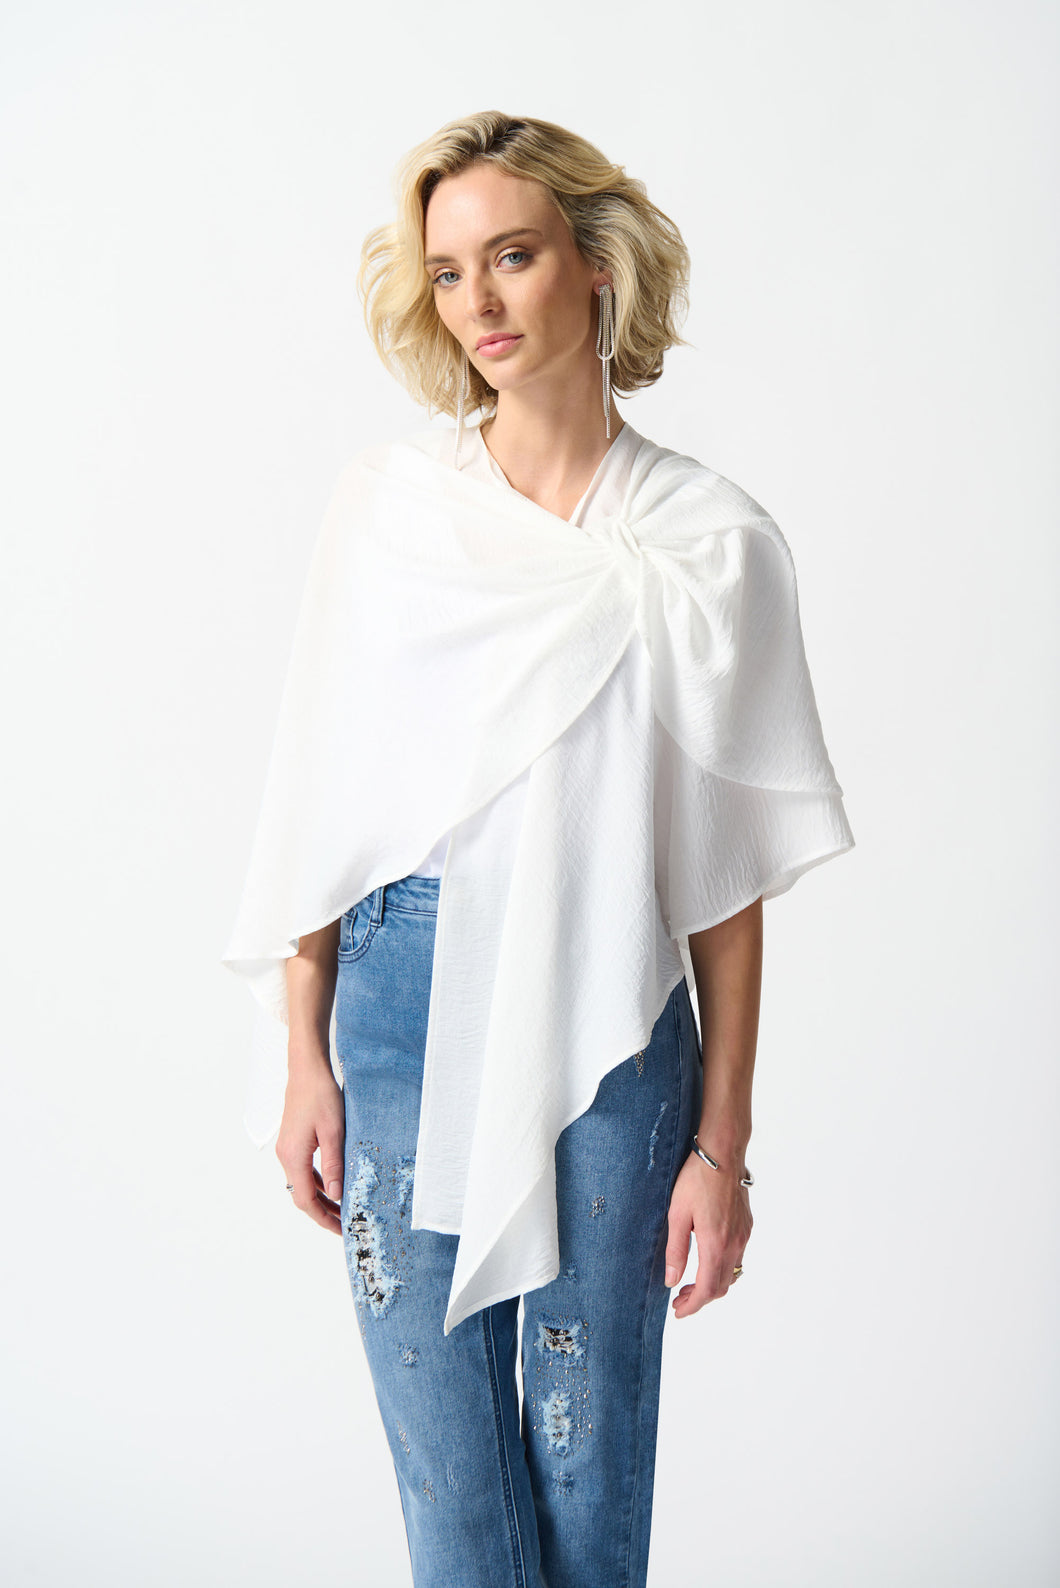 Joseph Ribkoff Gauze Poncho Silhouette Cover Up with a Front Loop in White, Black or Midnight Blue